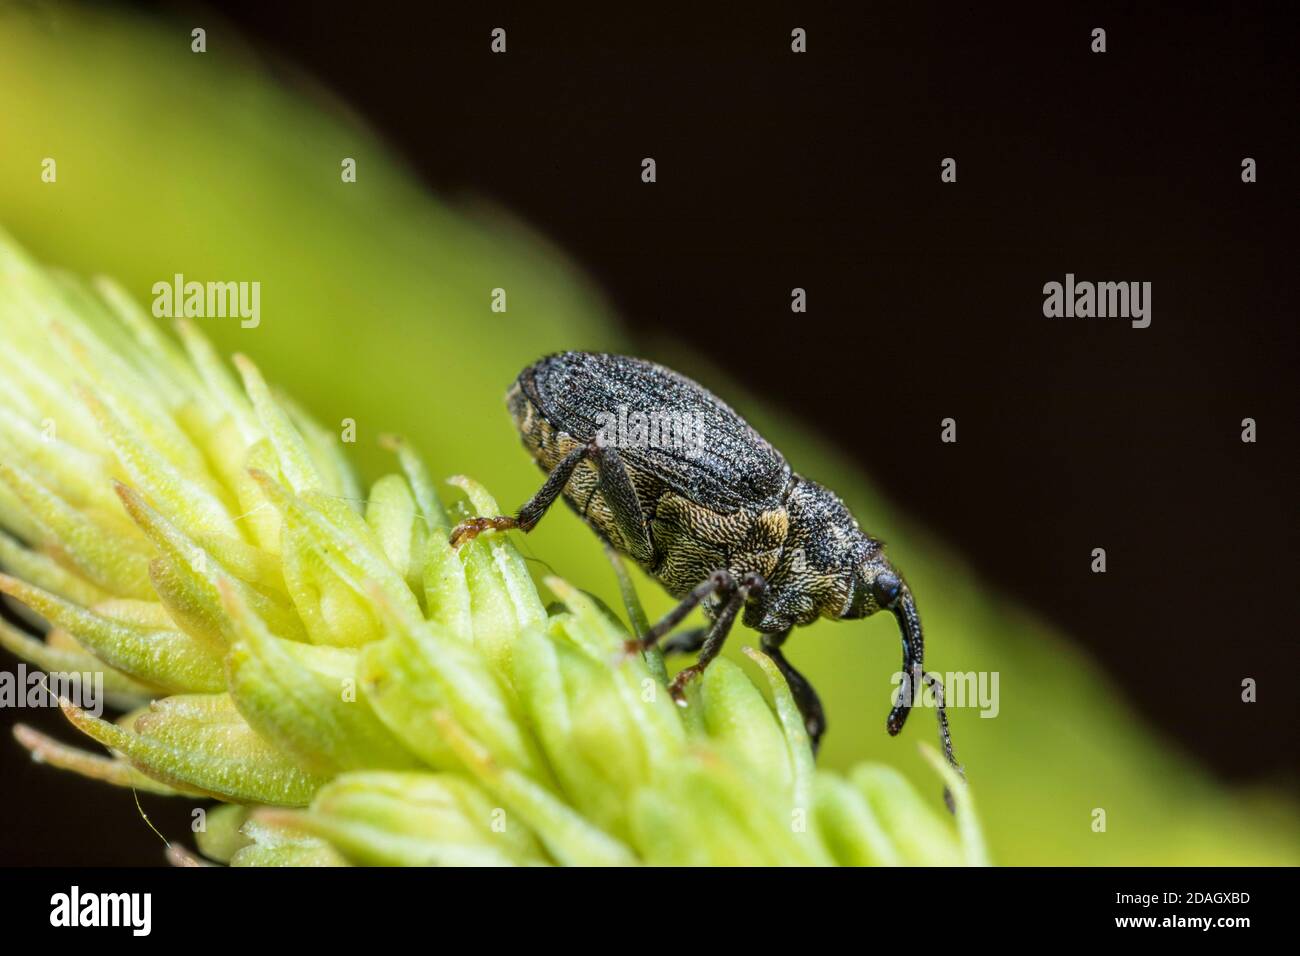 cabbage seedpod weevil (Ceutorhynchus assimilis), on an inflorescence, Germany Stock Photo